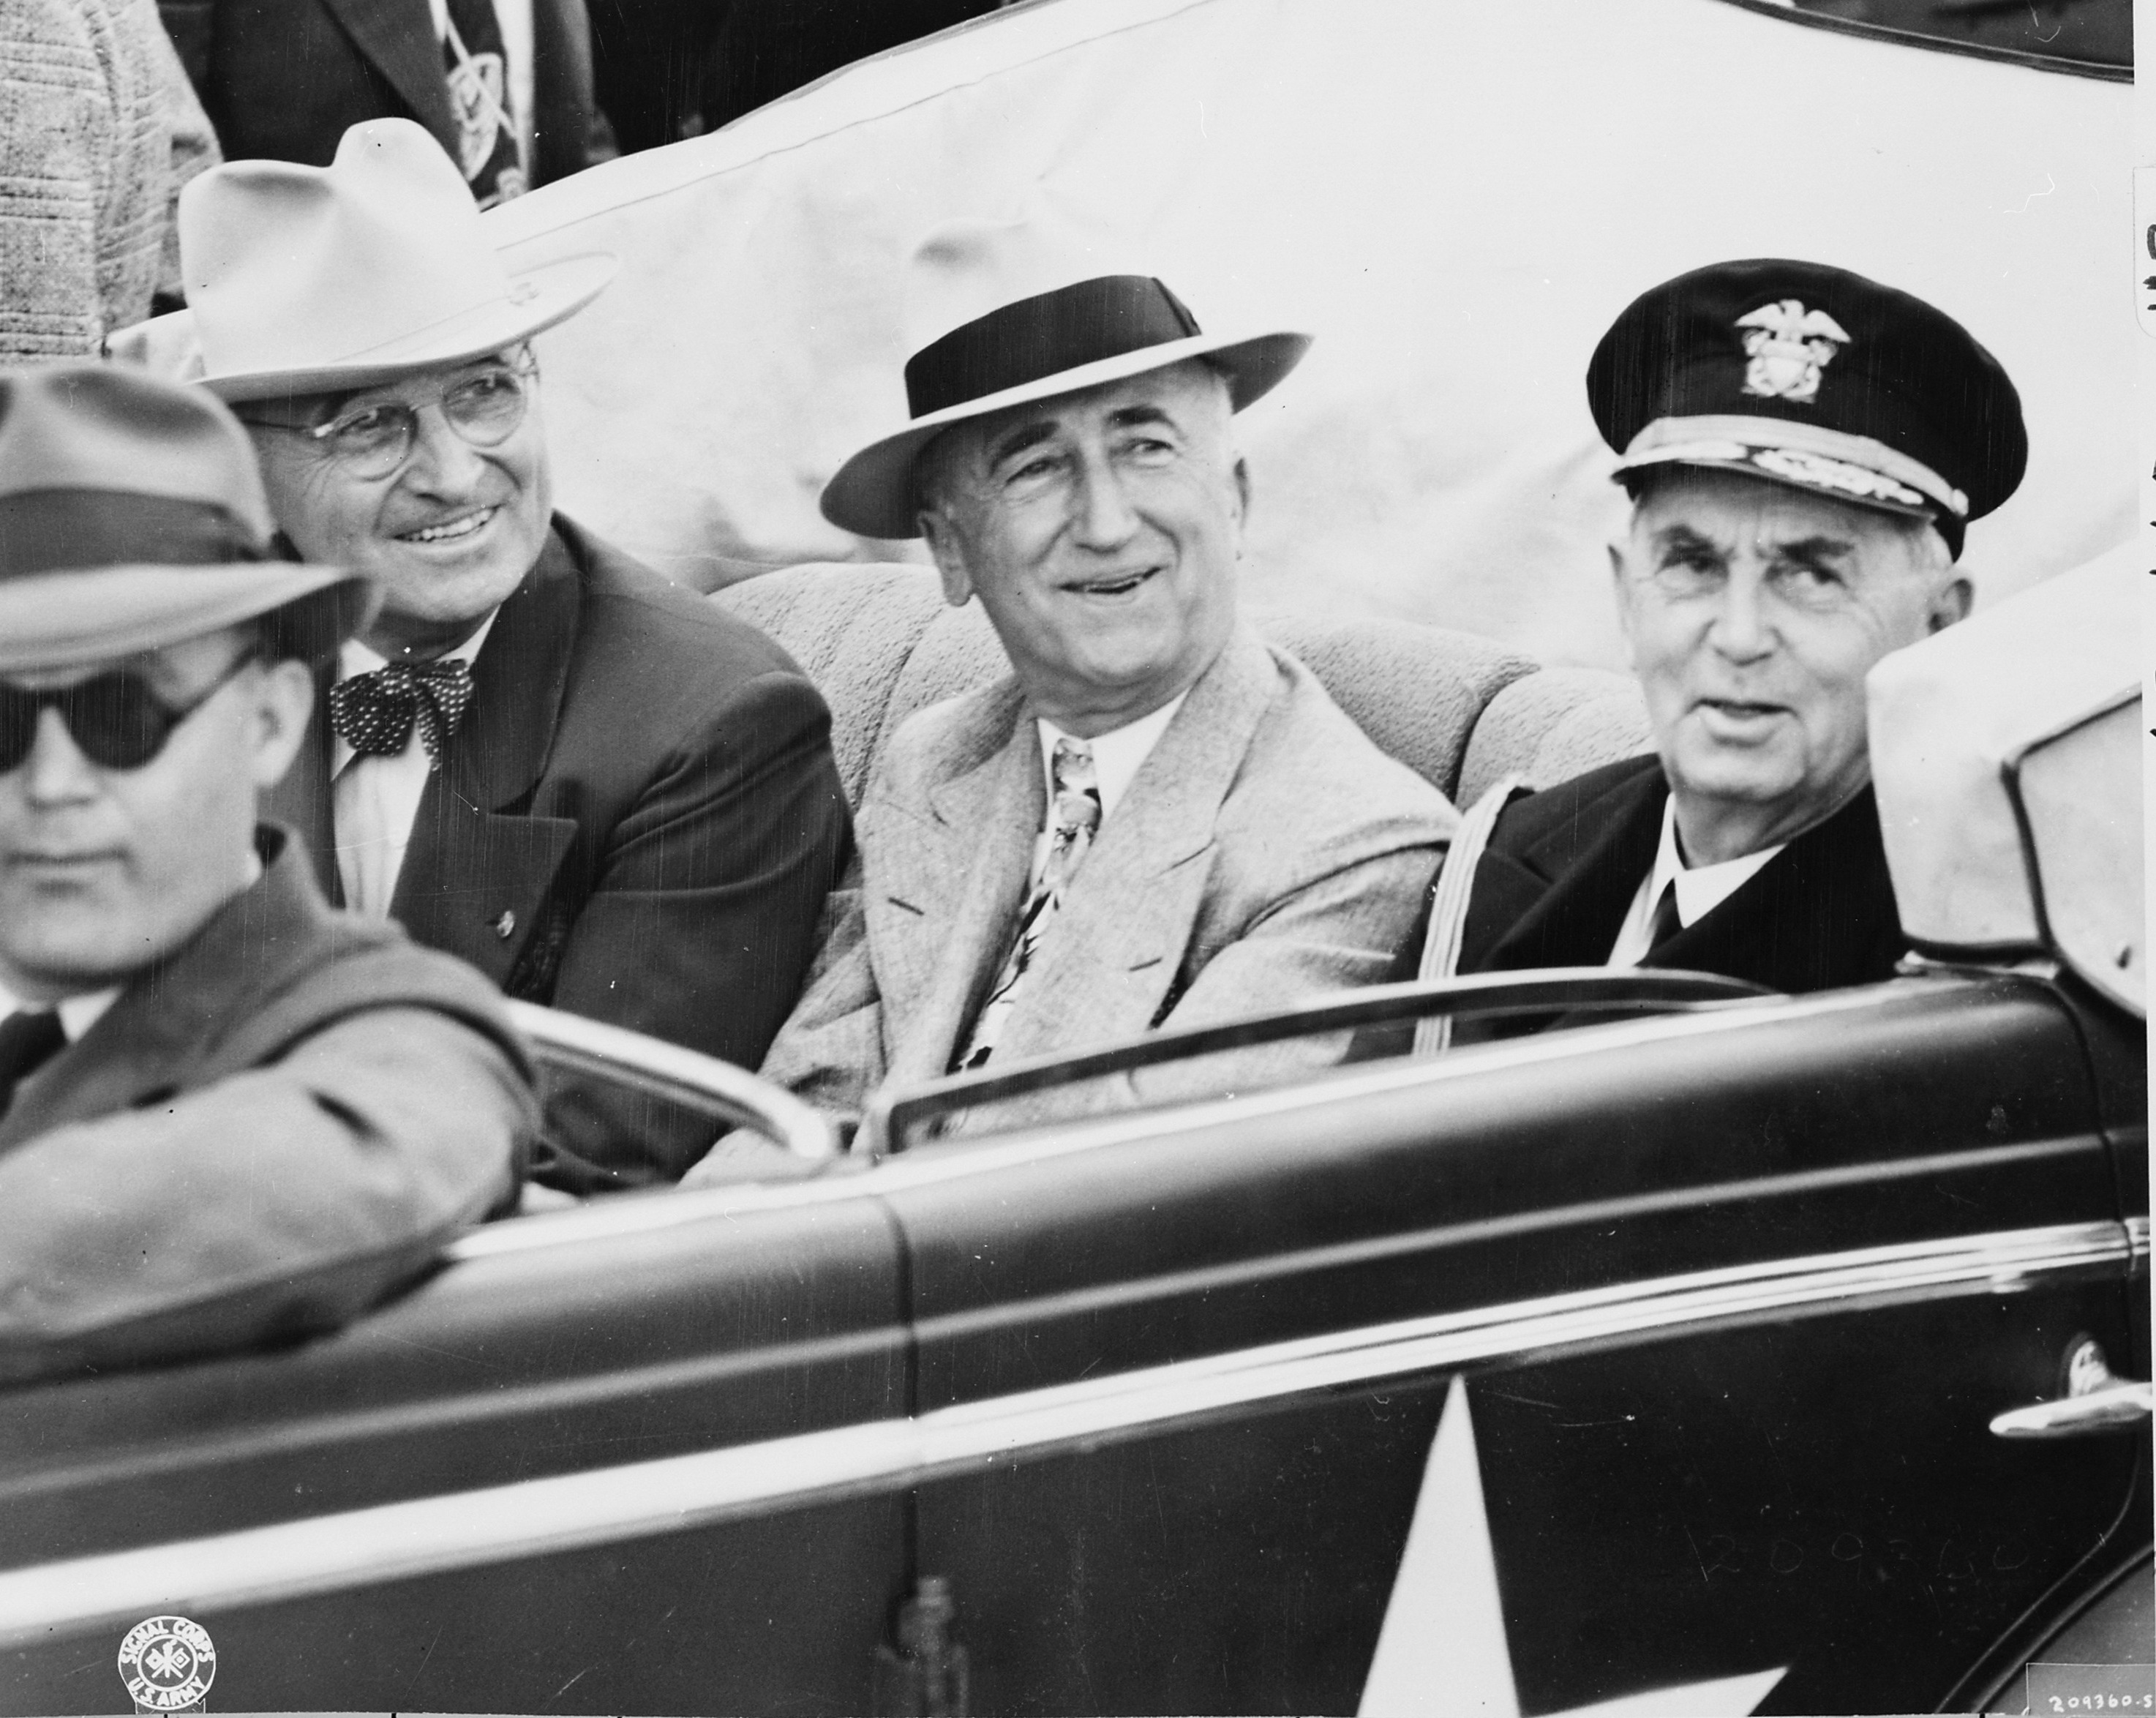 US President Harry Truman, Secretary of State James Byrnes, and Fleet Admiral William Leahy visiting Berlin, Germany, 16 Jul 1945